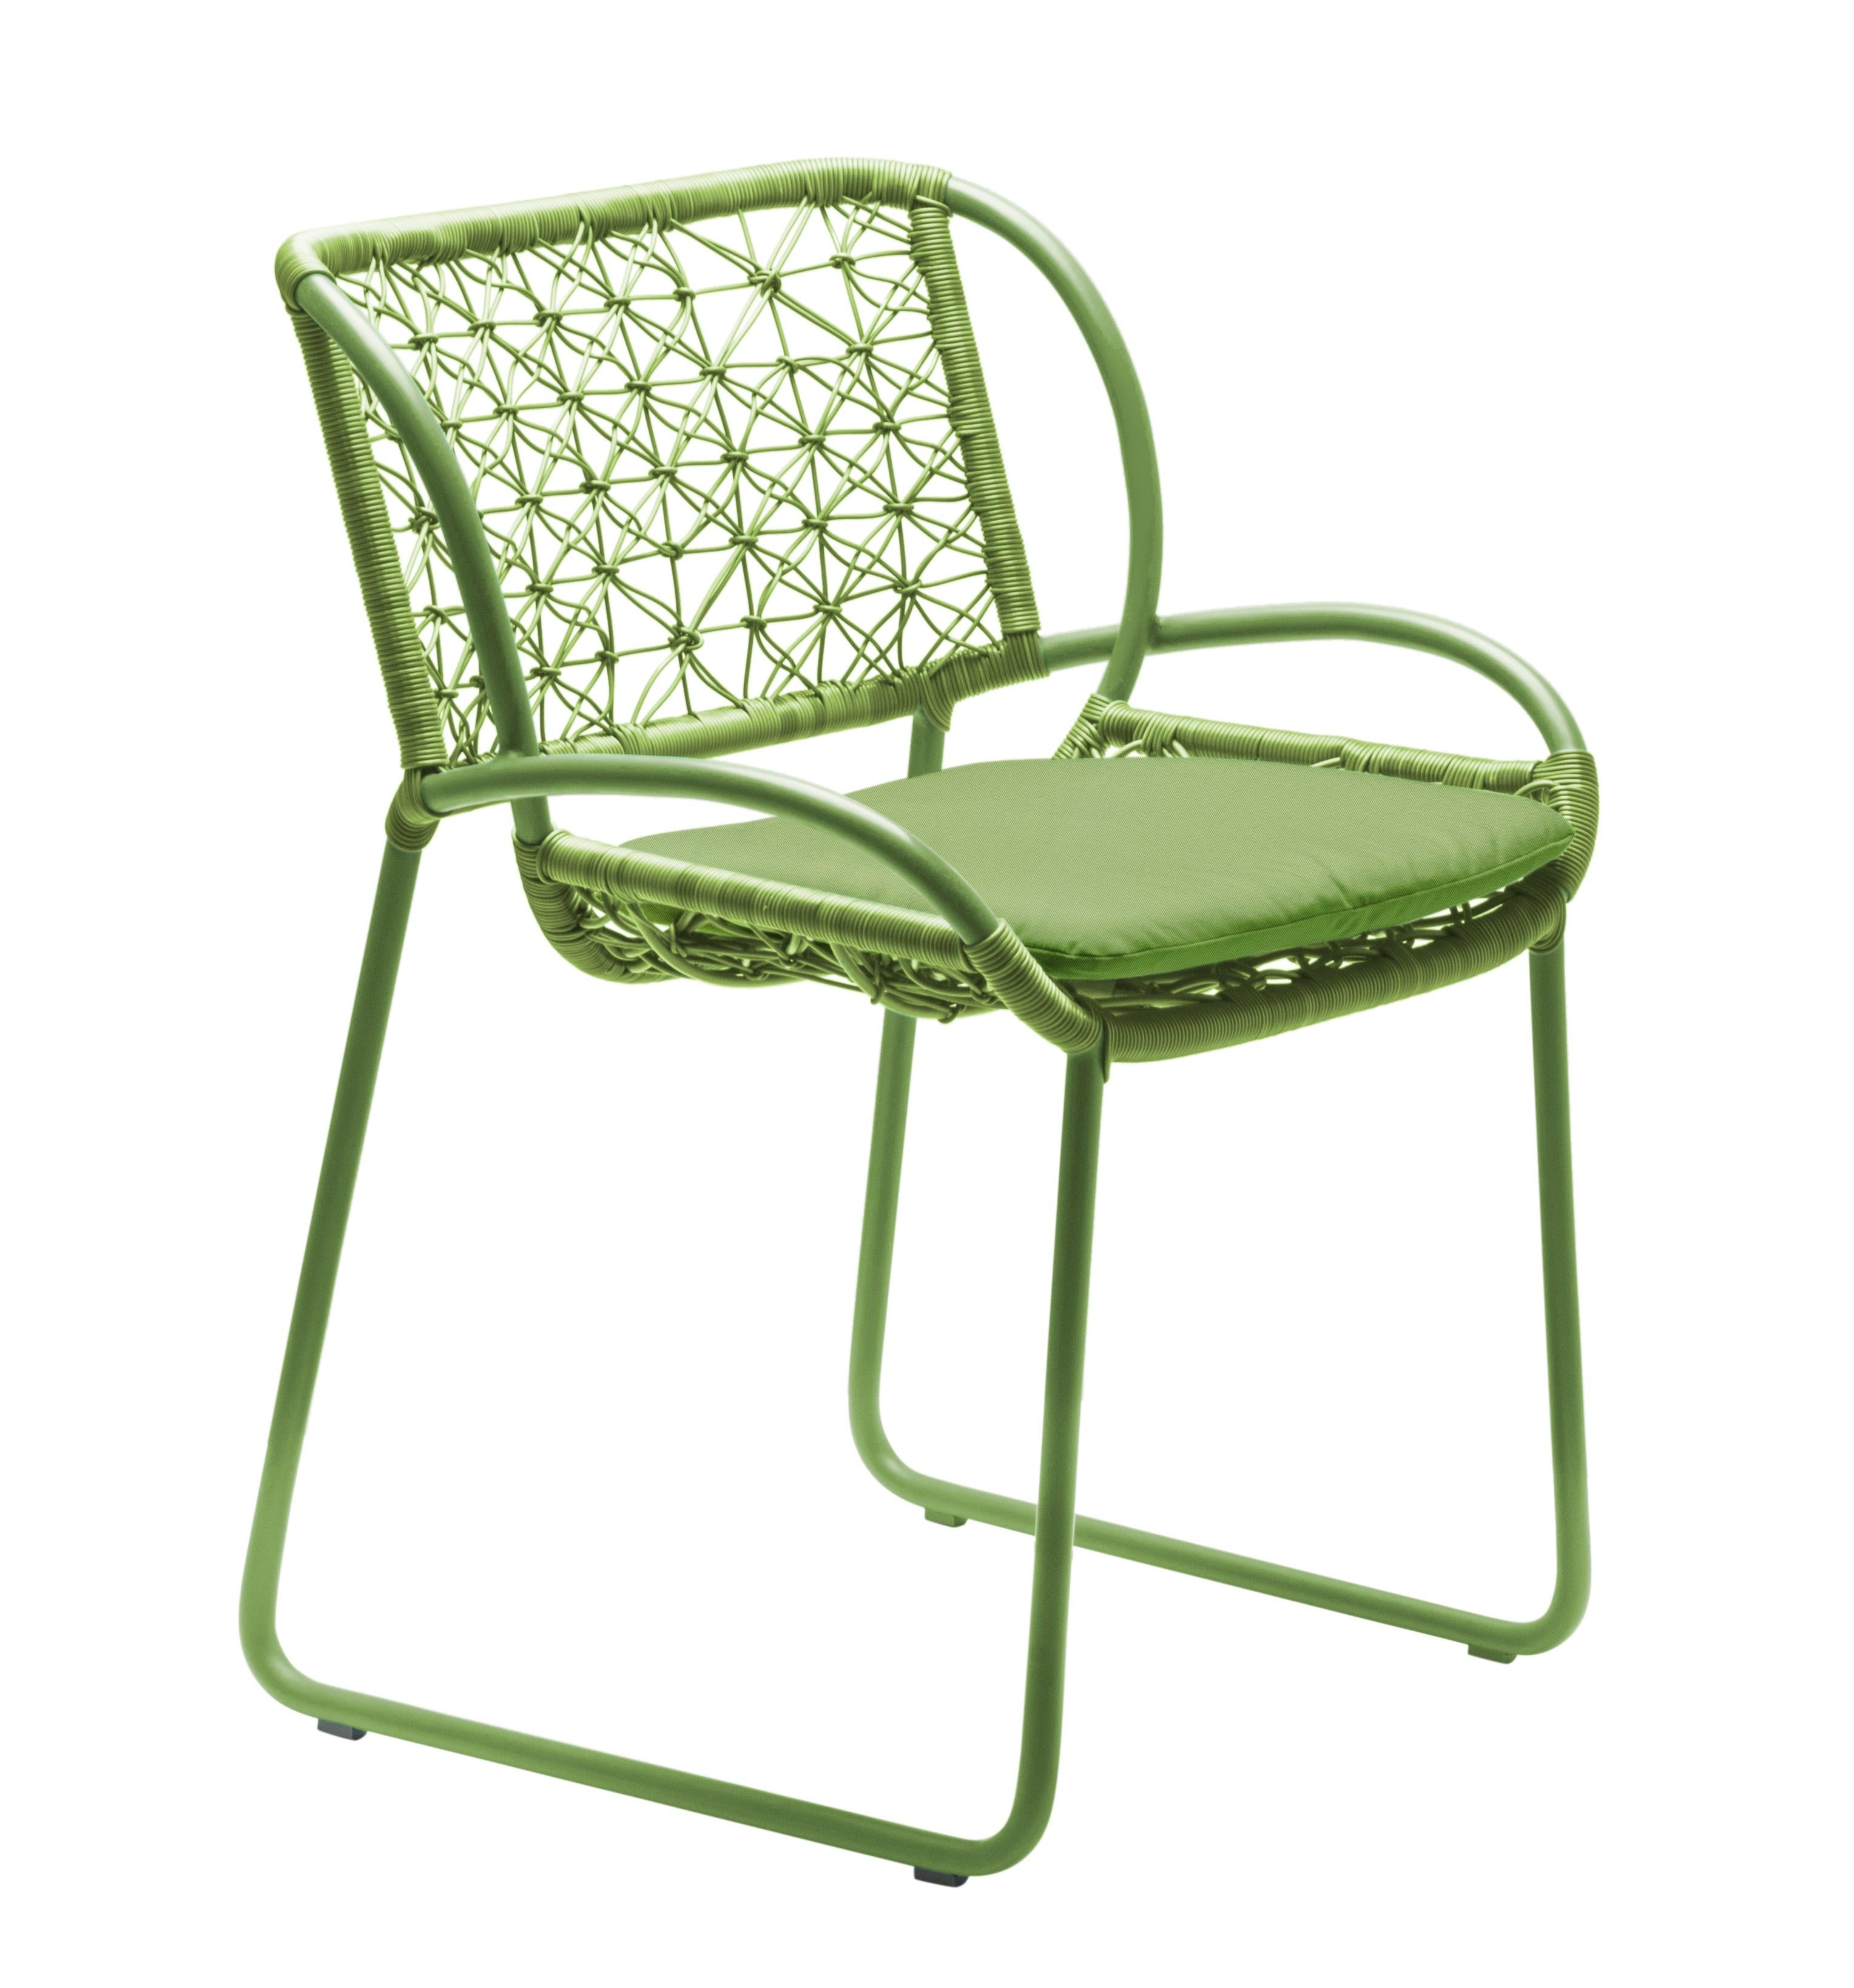 Armchair by Kenneth Cobonpue
Materials: Polyethylene. Aluminum. 
Dimensions: 56 x 59 x H 80 cm

The boldly colored frame and geometric weave pattern of the Adesso ottoman and chairs bring to mind a summer field of flowers. Coupled with a dining